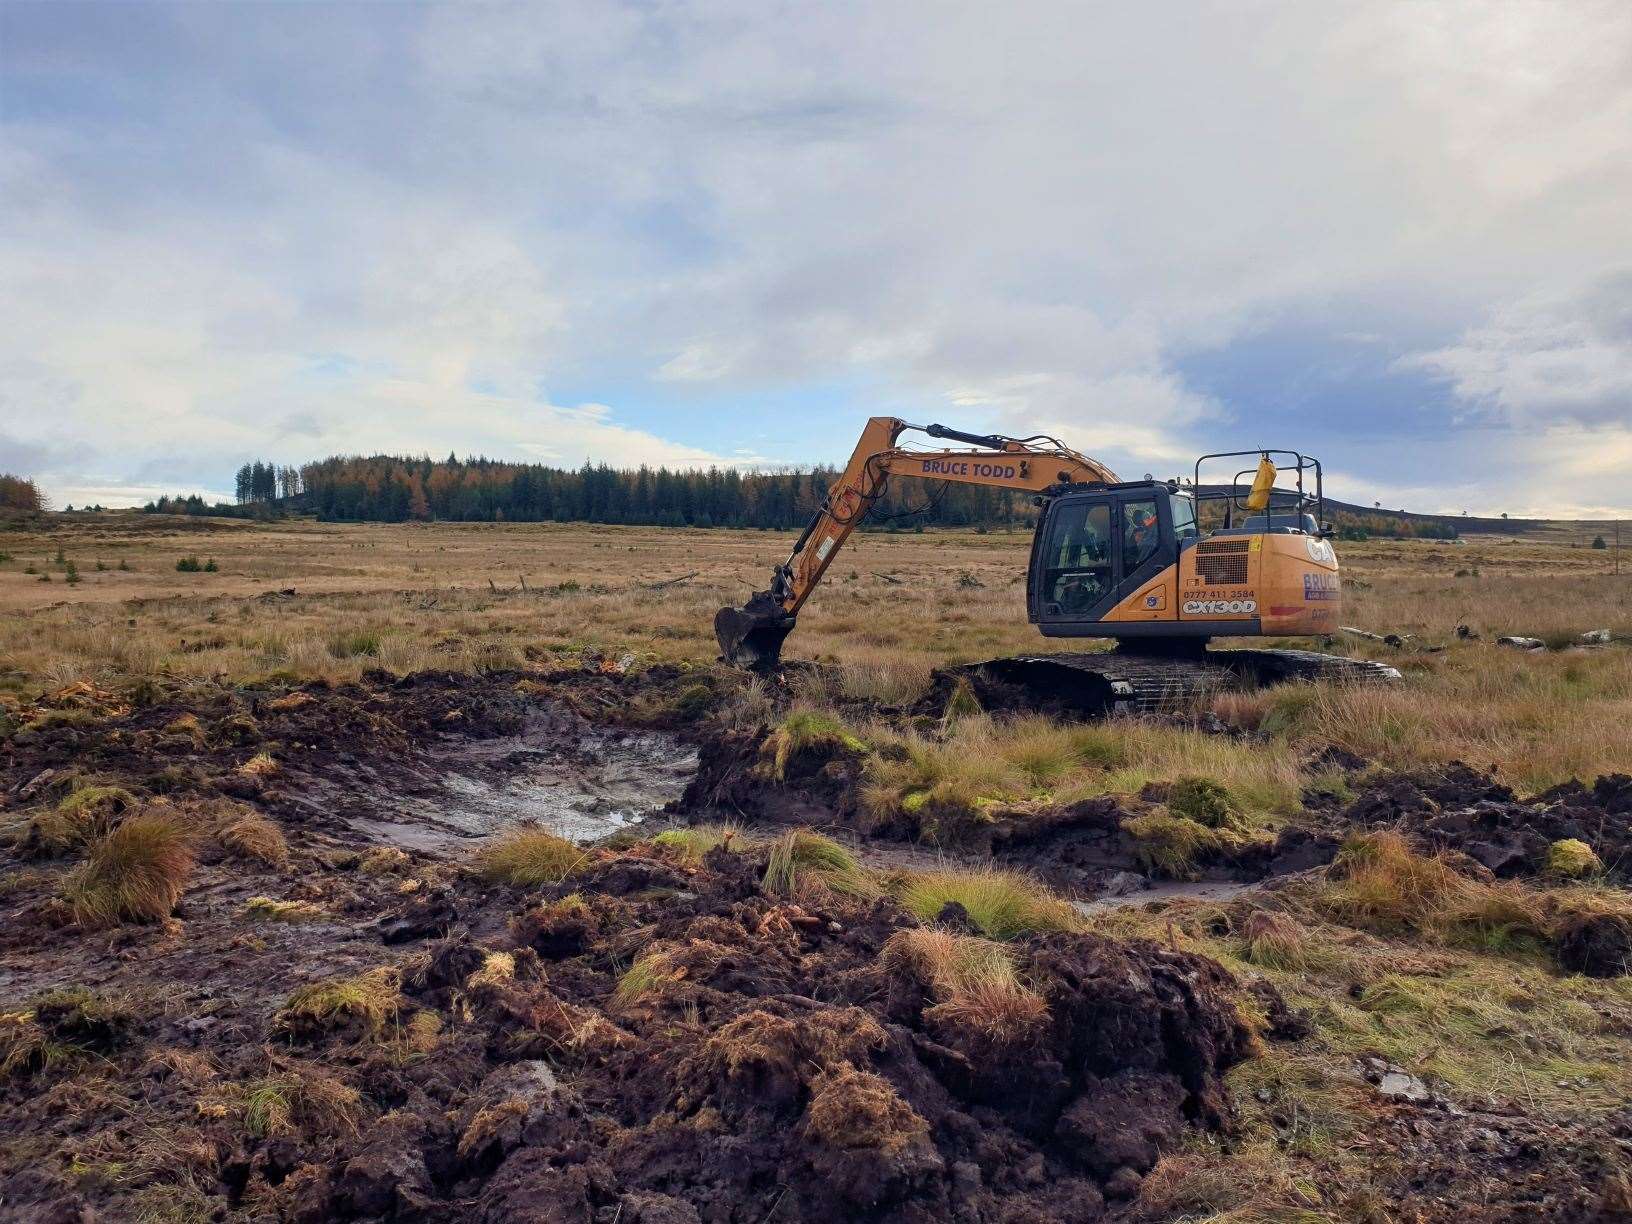 More than 10,000 hectares of peatland has now been 're-wetted' on FLS land. Picture: FLS